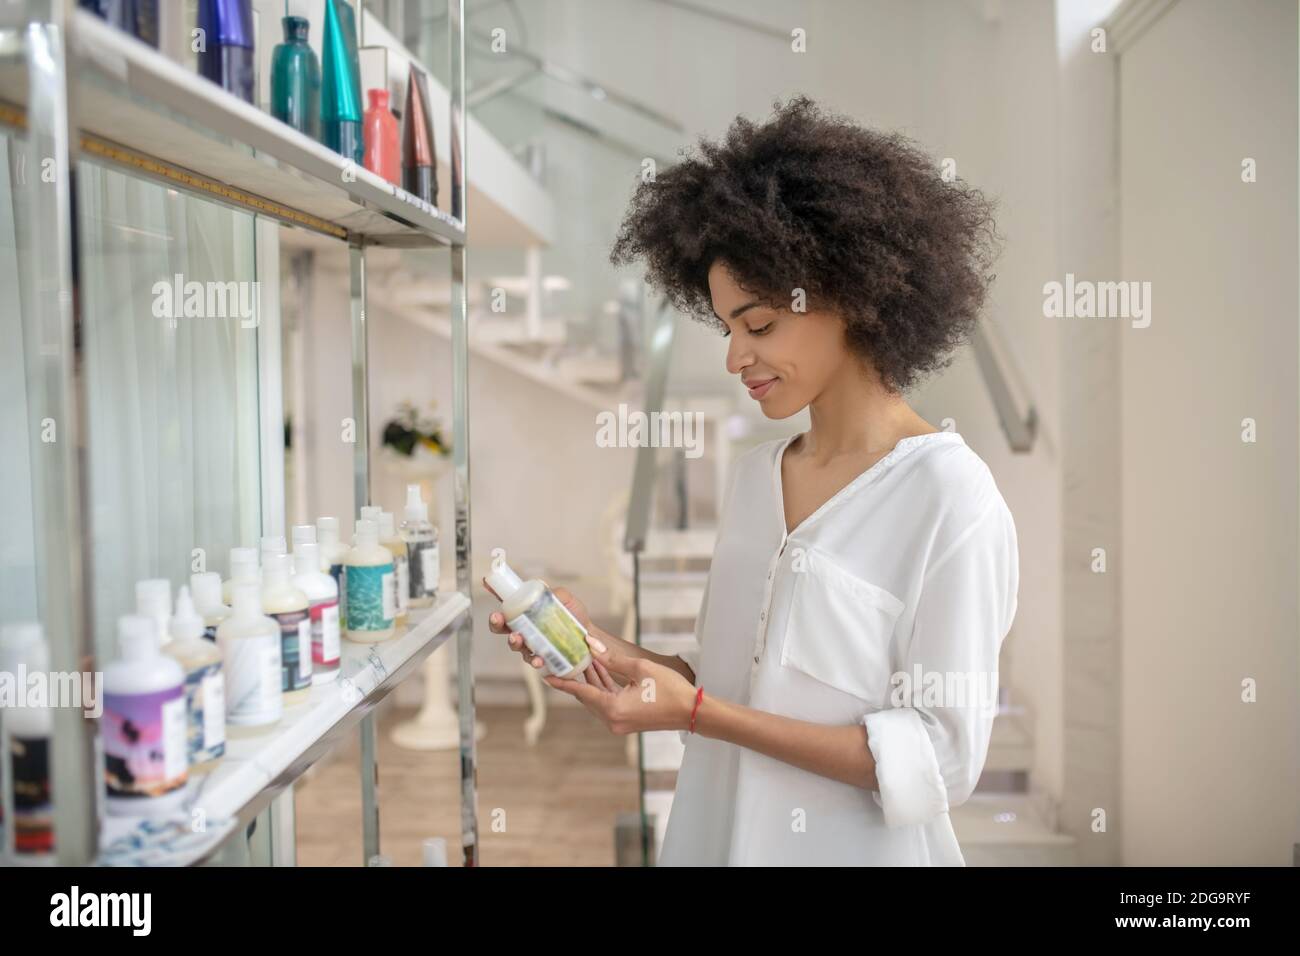 Young smiling girl interested in cosmetic product Stock Photo